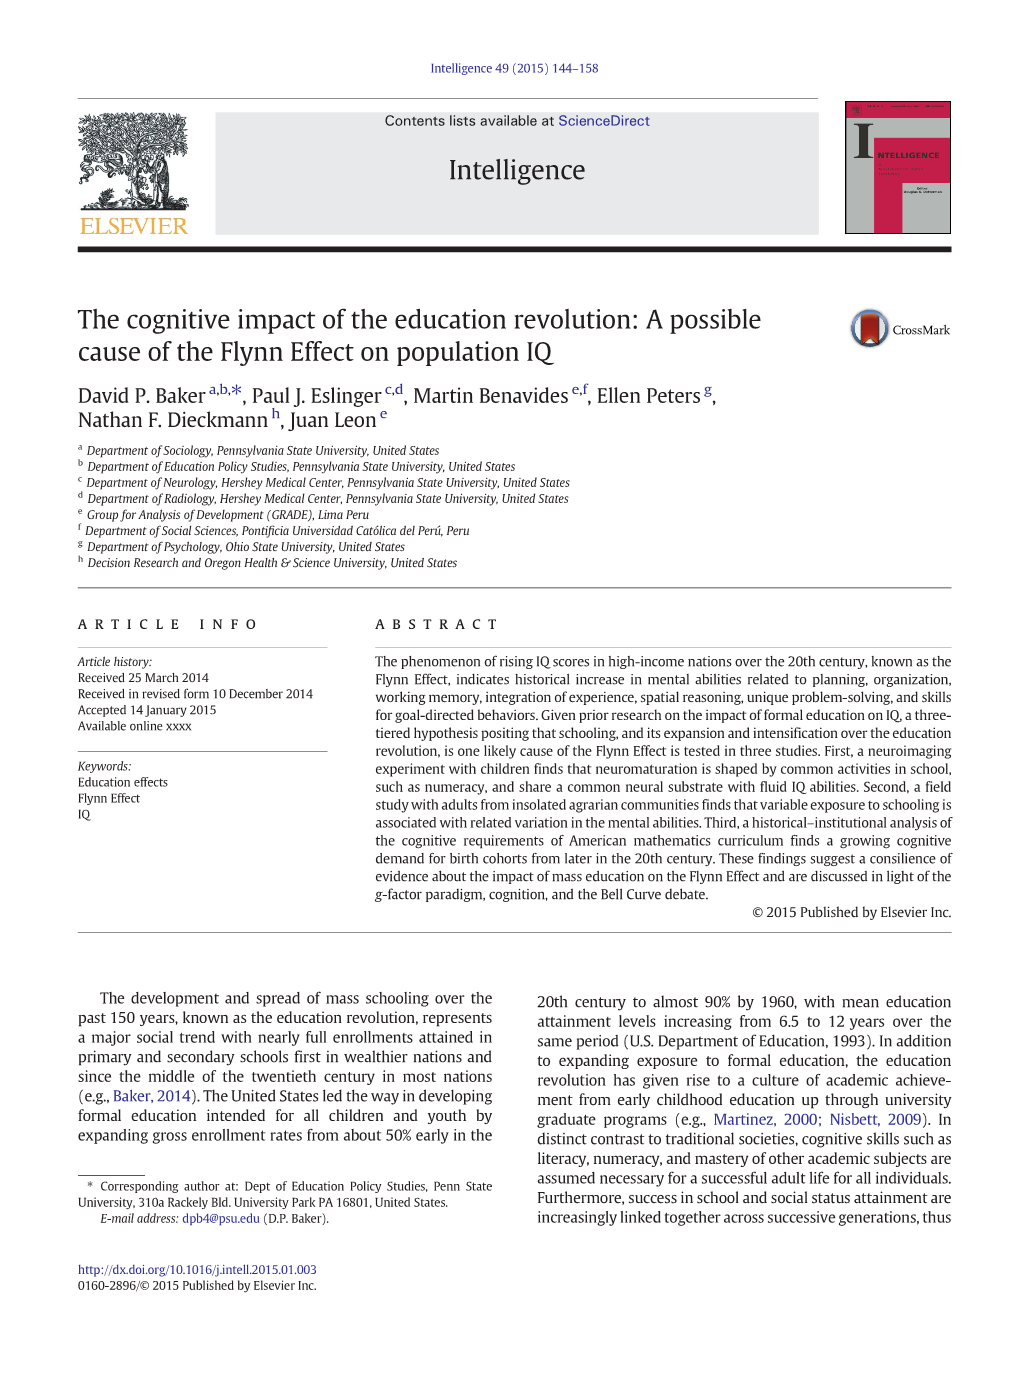 The Cognitive Impact of the Education Revolution: a Possible Cause of the Flynn Effect on Population IQ